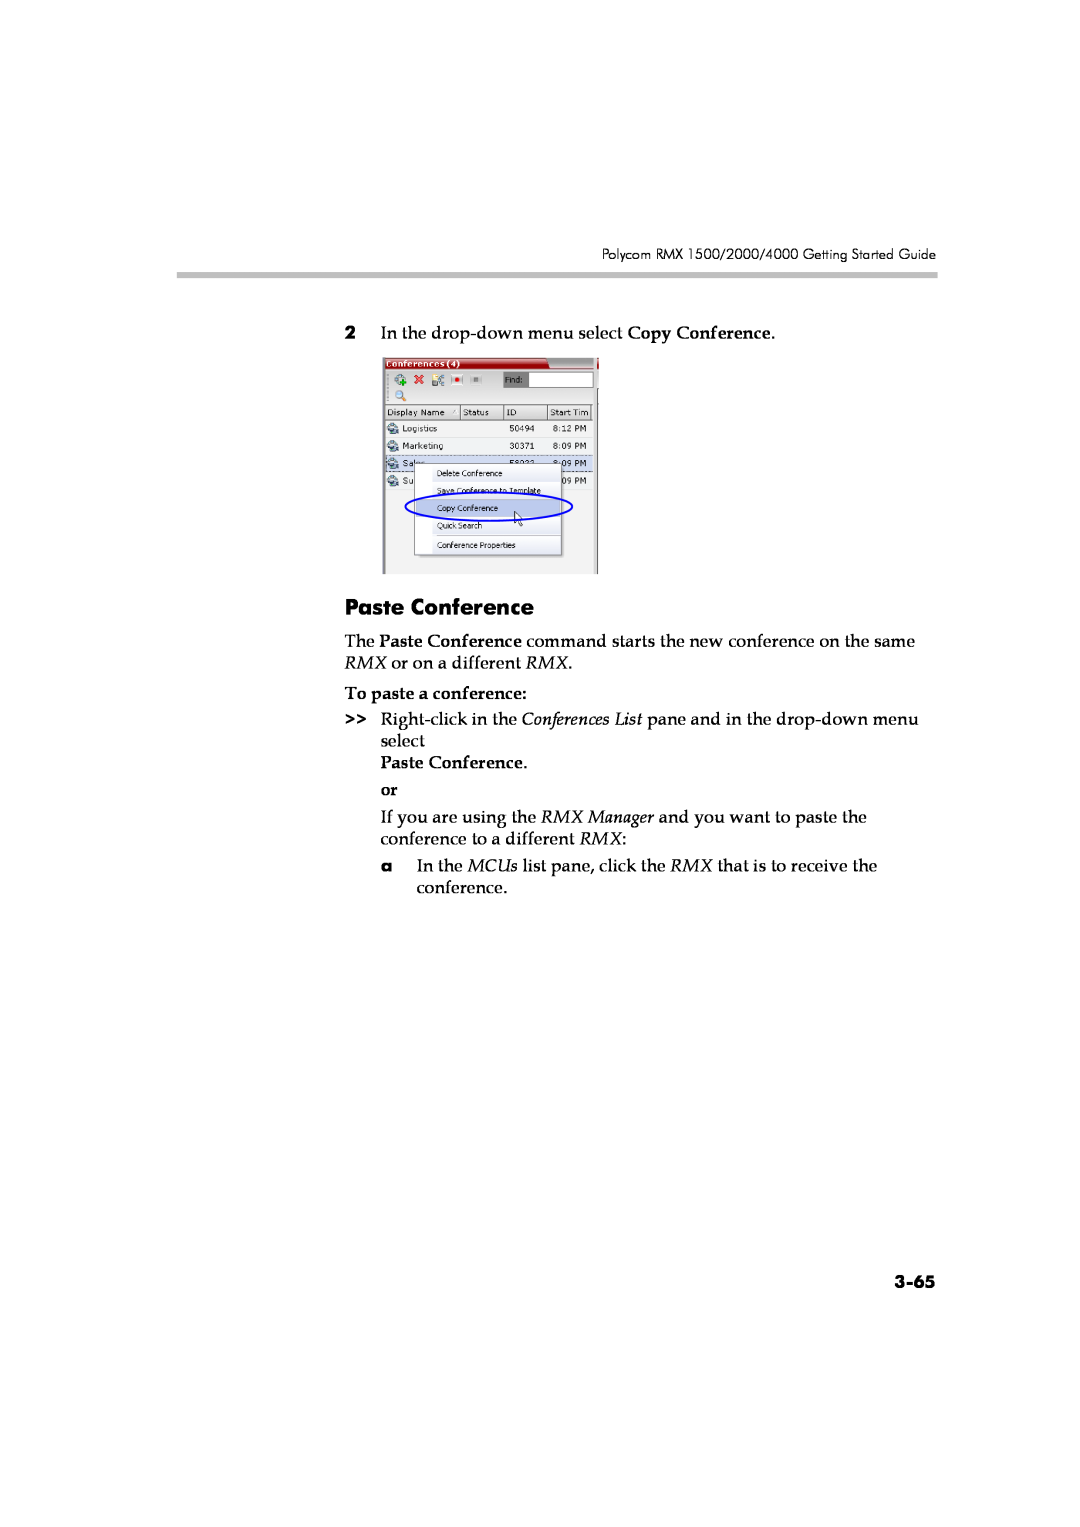 Polycom DOC2560A manual To paste a conference, Paste Conference. or, 3-65 